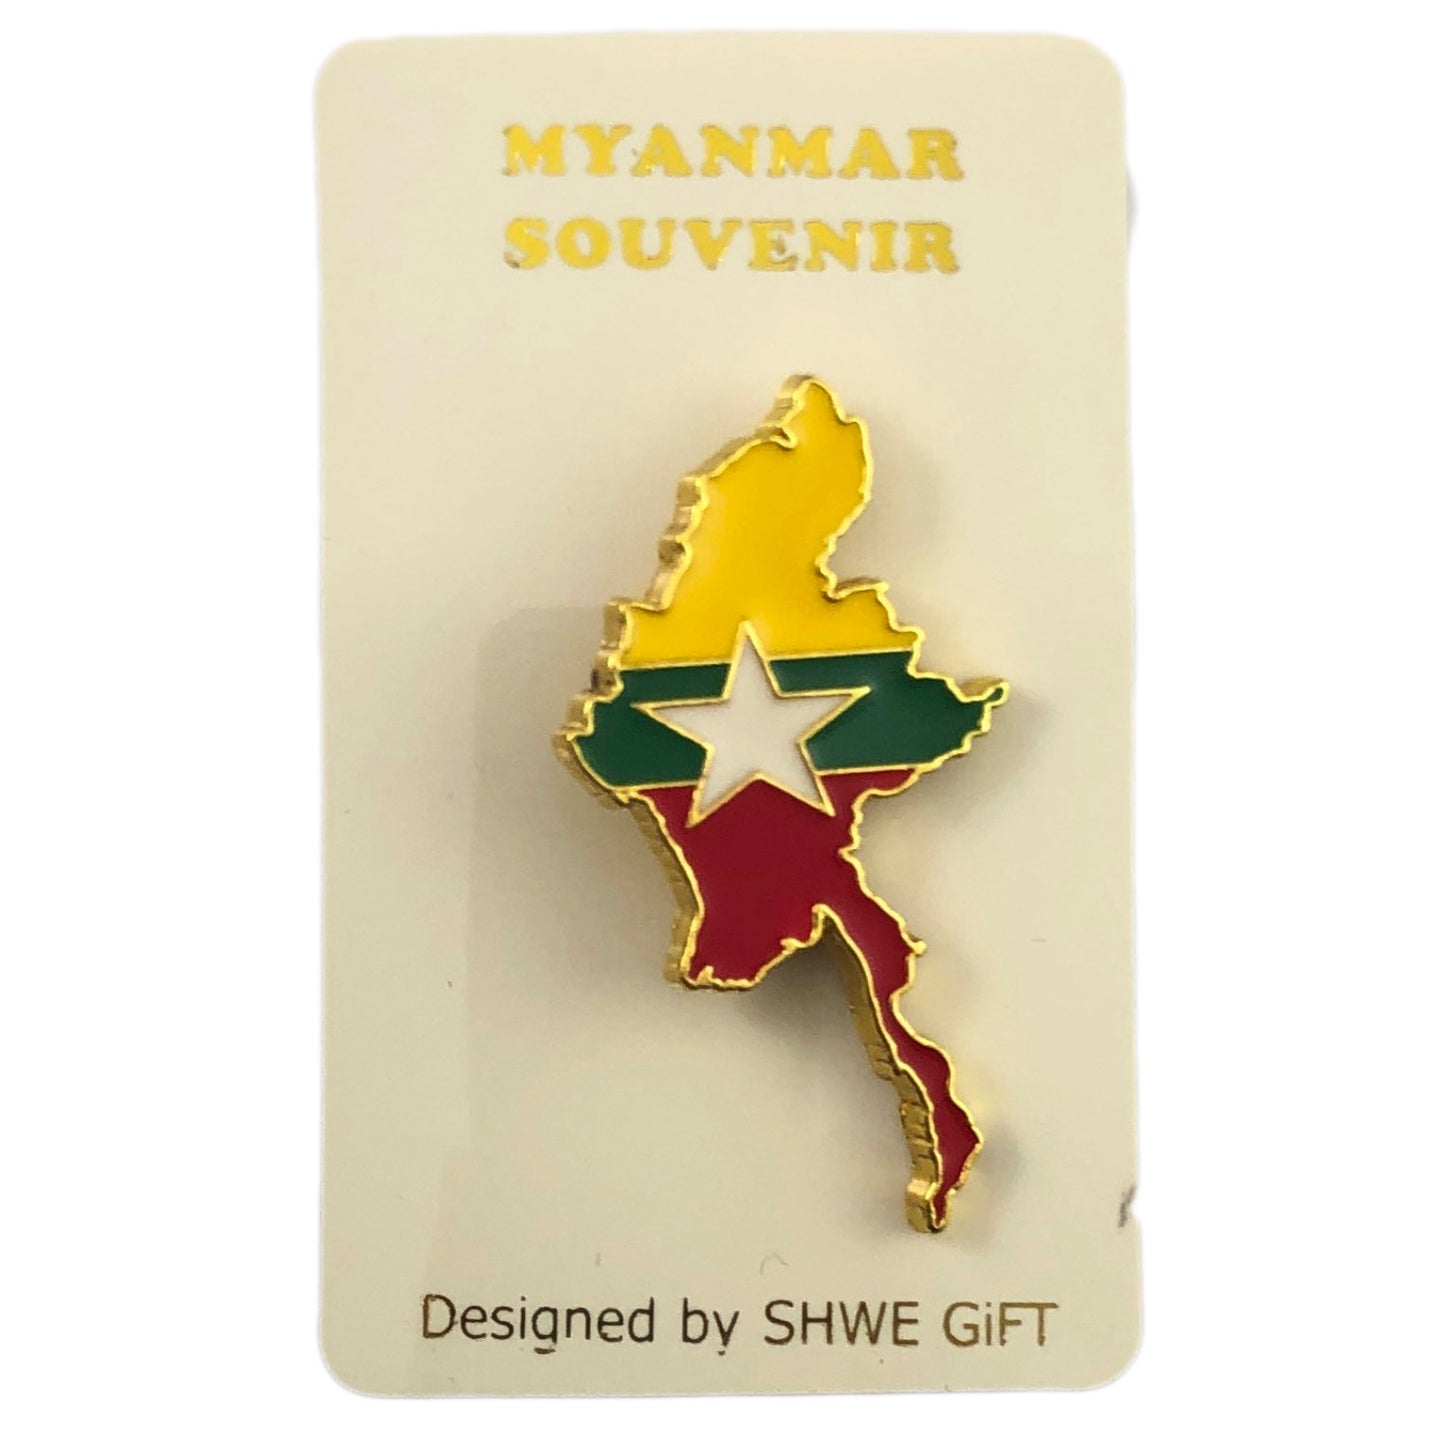 Myanmar Map Pin - Length 2 inches